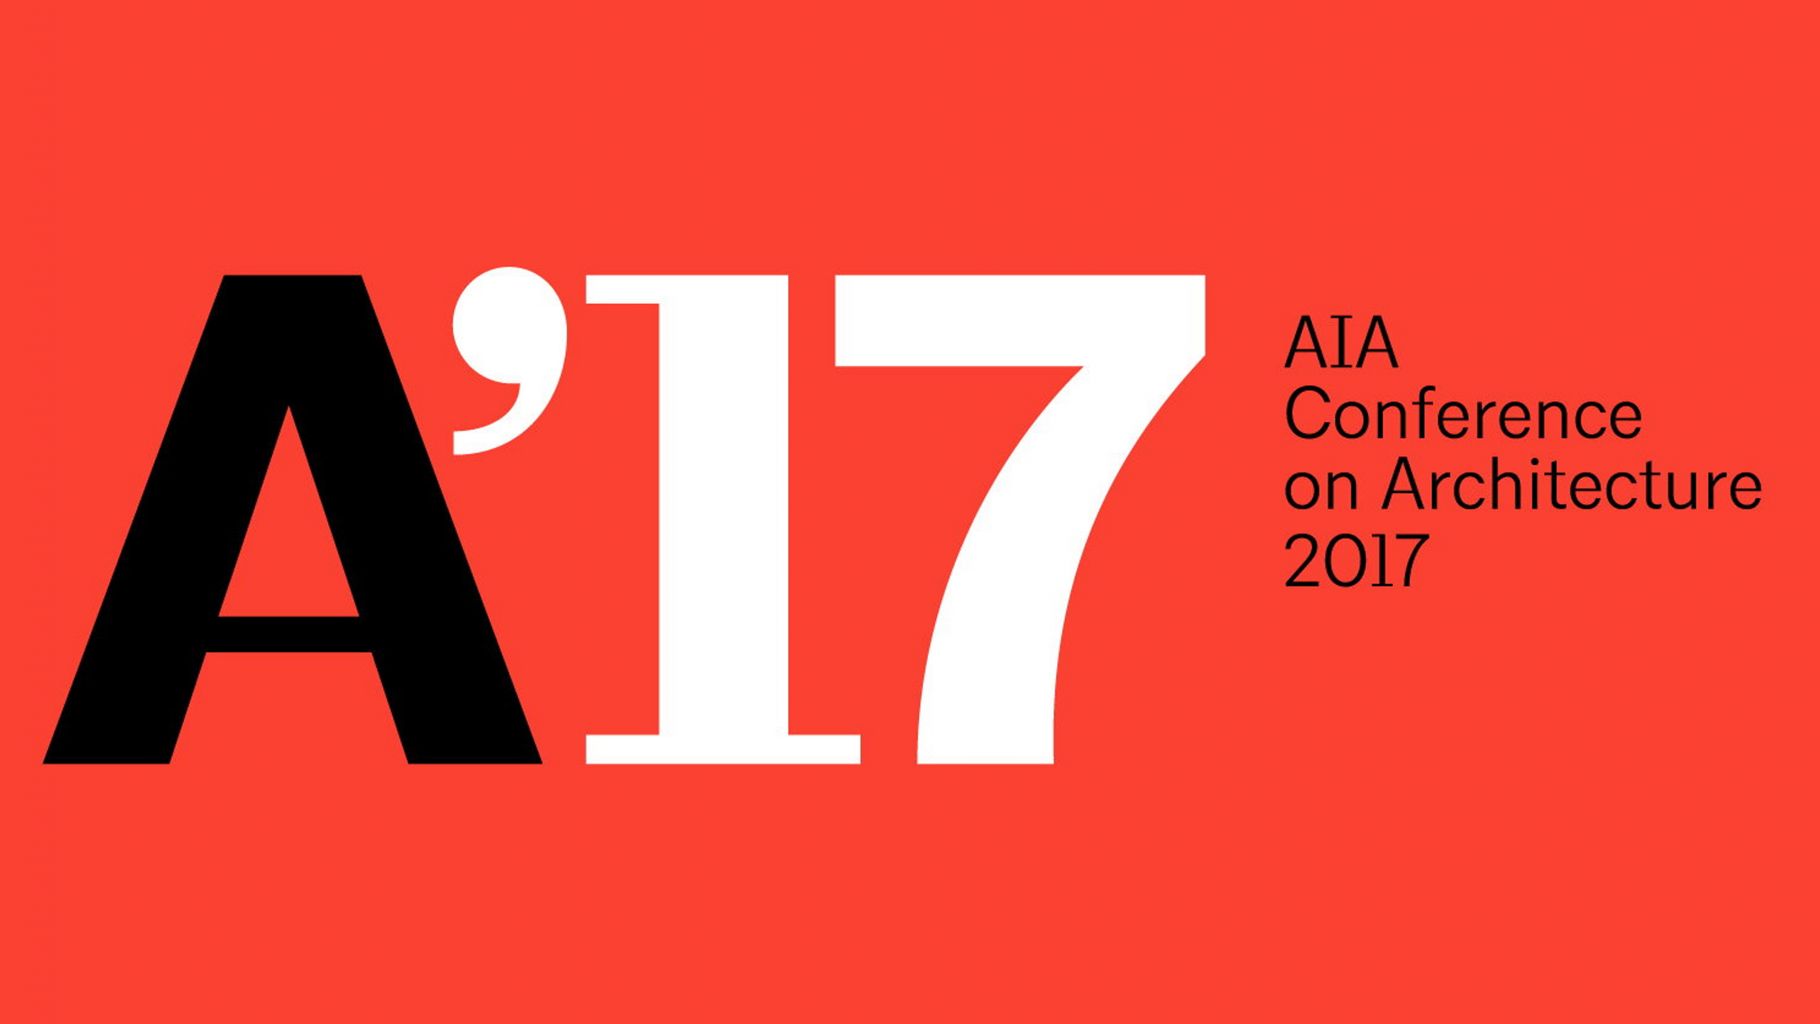 MMD To Participate In AIA Conference On Architecture 2017